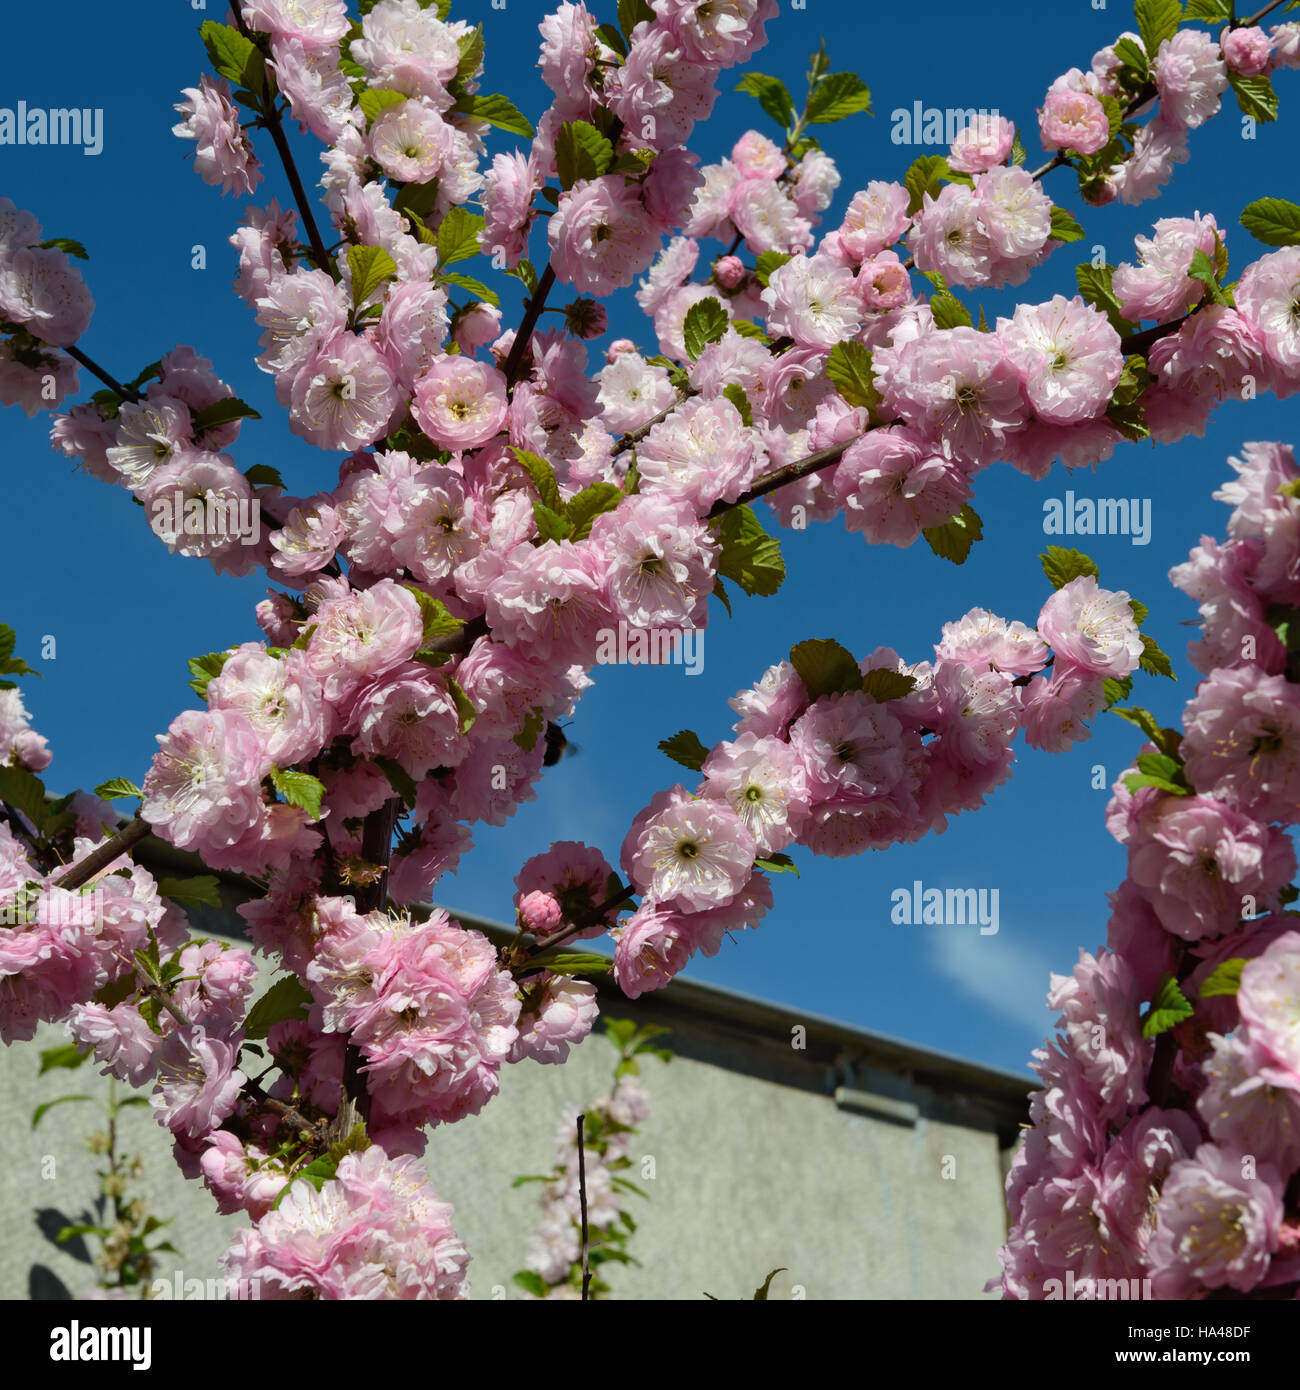 Many bright pink flowers on  flowering shoots of Prunus triloba shrub on bright blue sky background. Stock Photo